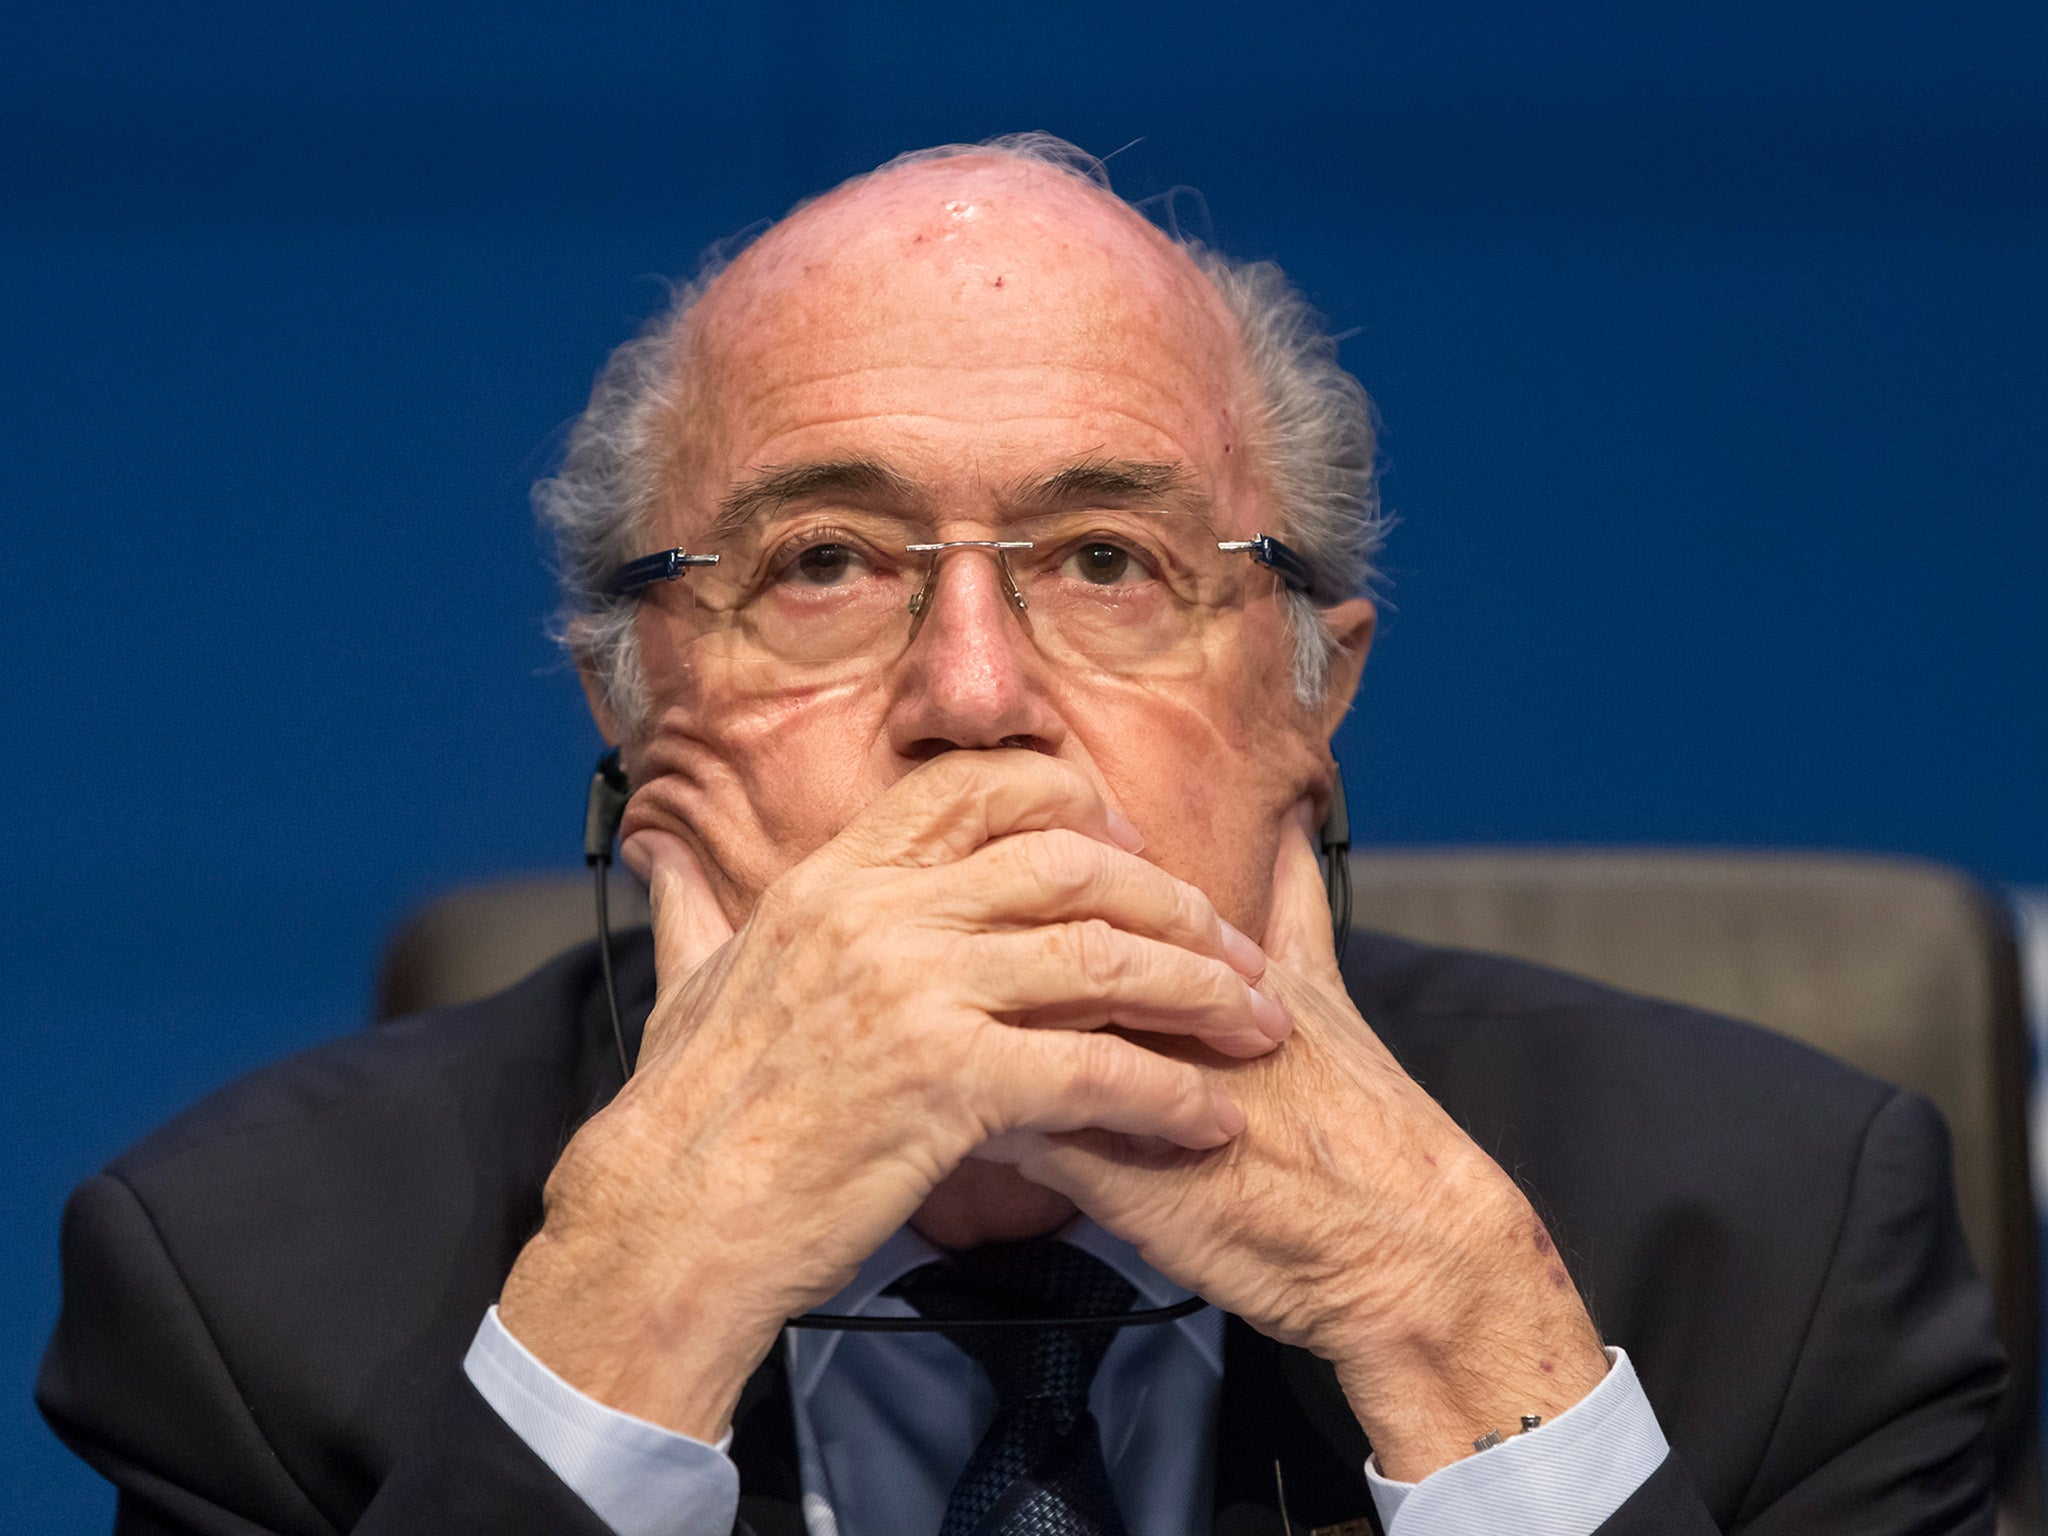 The Swiss football administrator has been head of Fifa since 1998